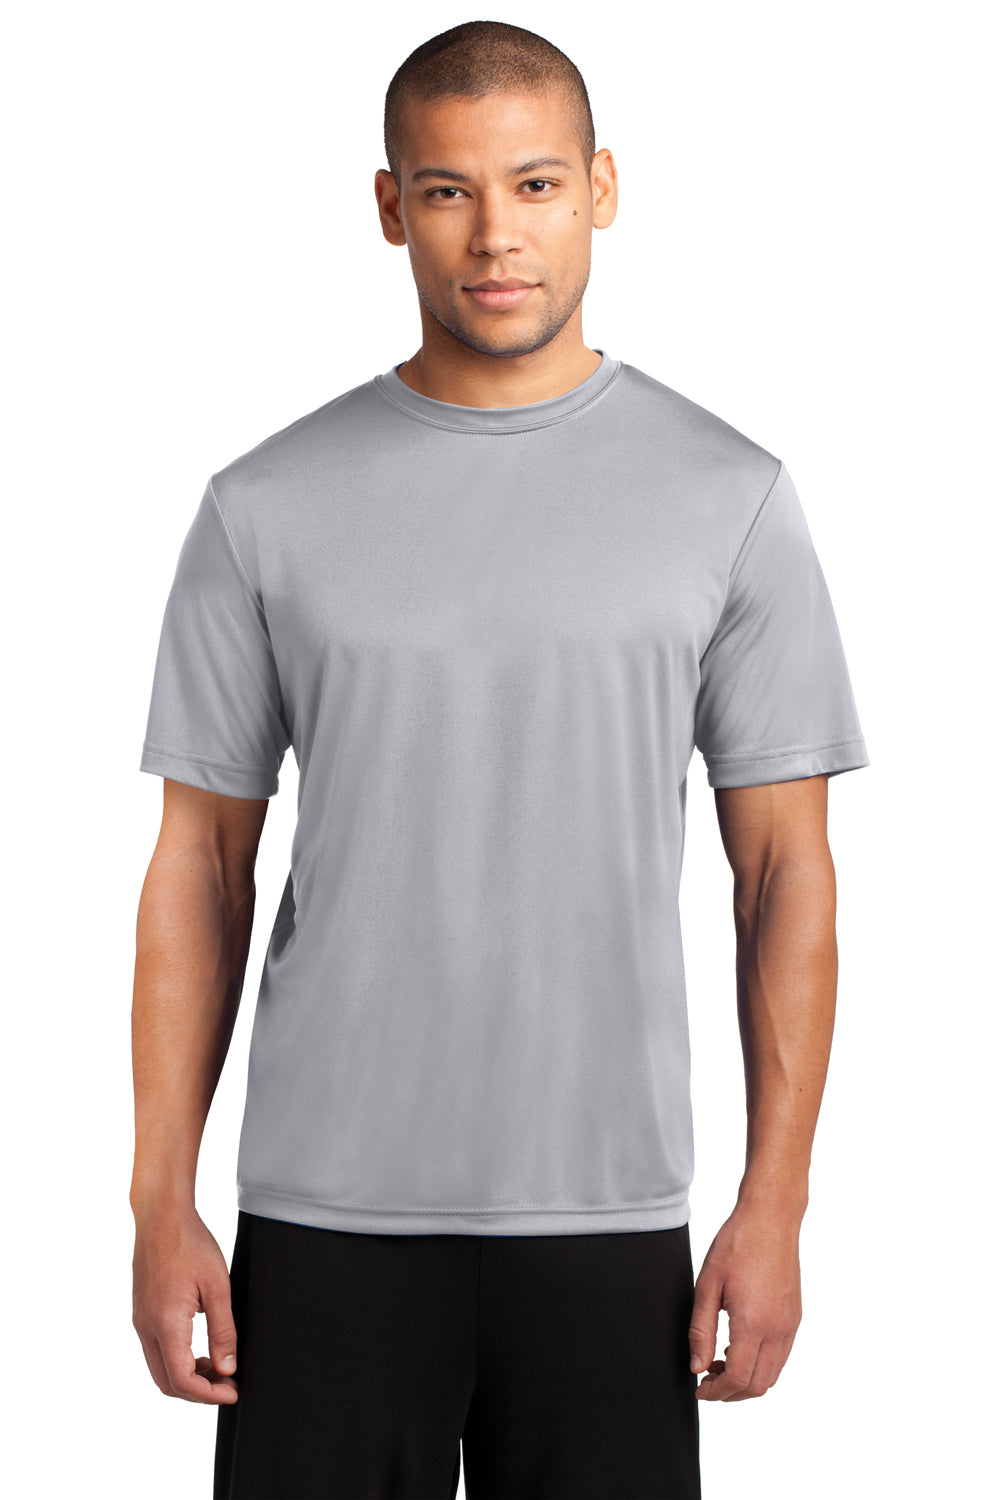 Port & Company PC380 Mens Dry Zone Performance Moisture Wicking Short Sleeve Crewneck T-Shirt Silver Grey Front